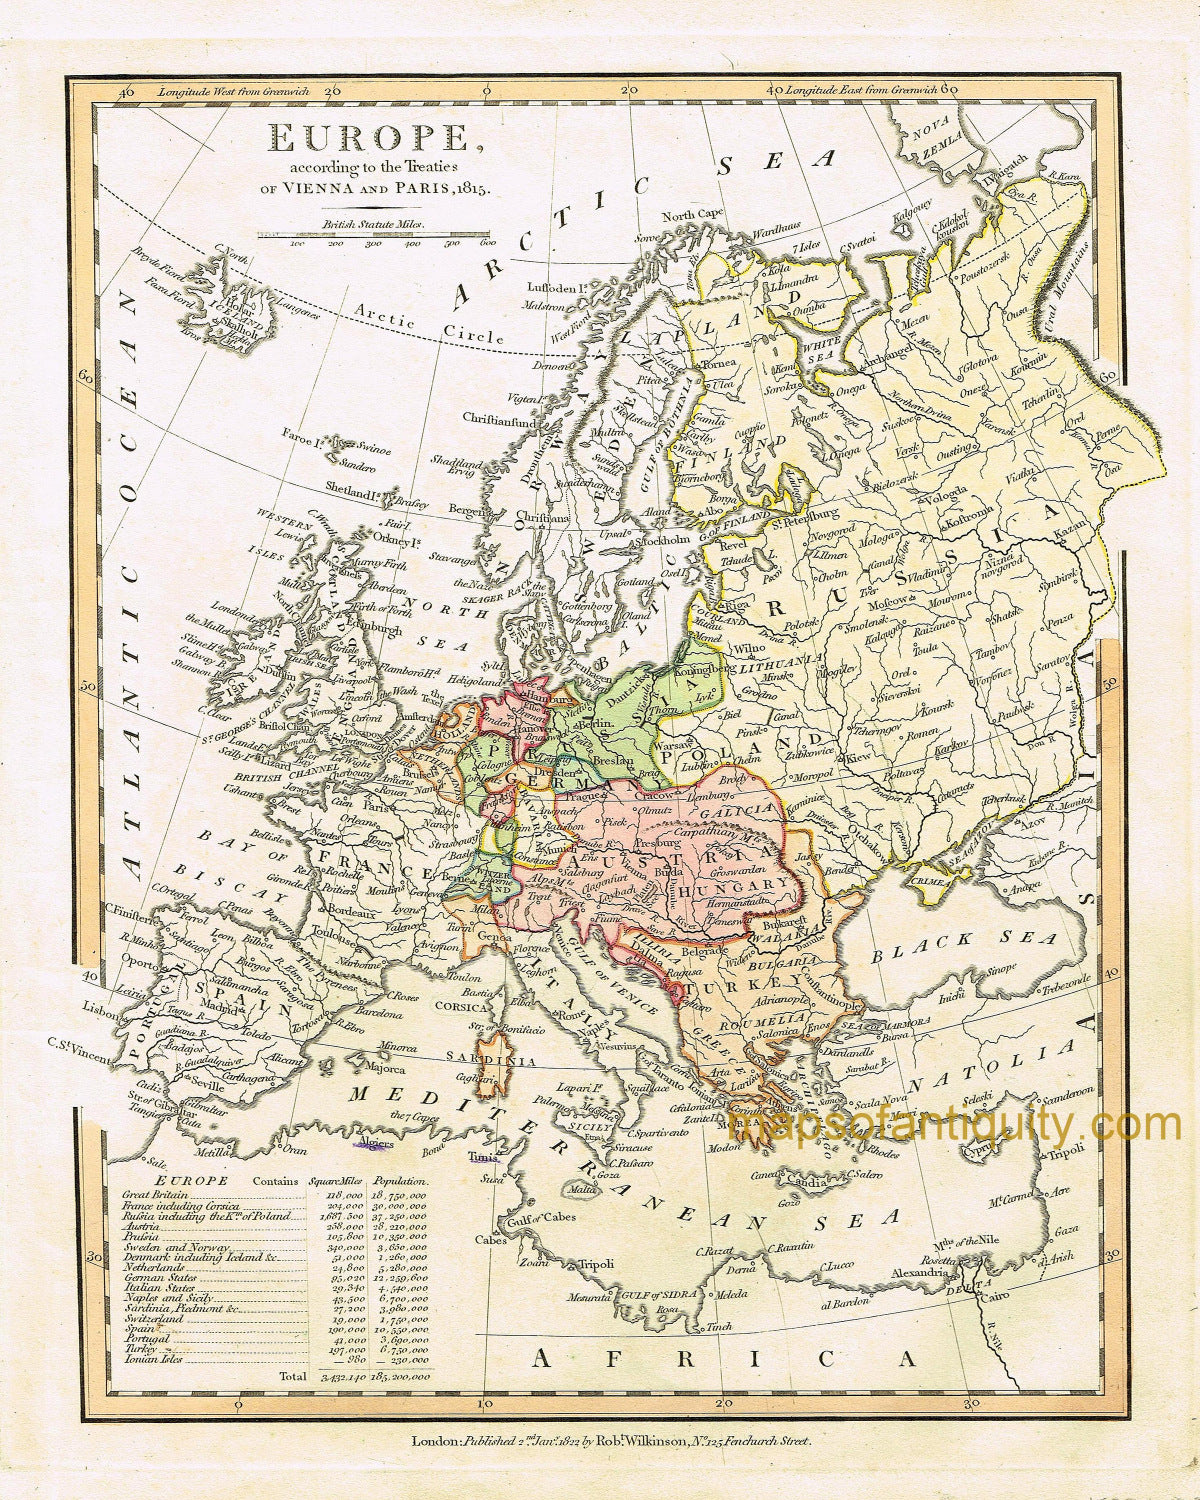 Antique-Hand-Colored-Map-Europe-according-to-the-Treaties-of-Vienna-and-Paris-1815-Europe-Europe-General-1827-Wilkinson-Maps-Of-Antiquity